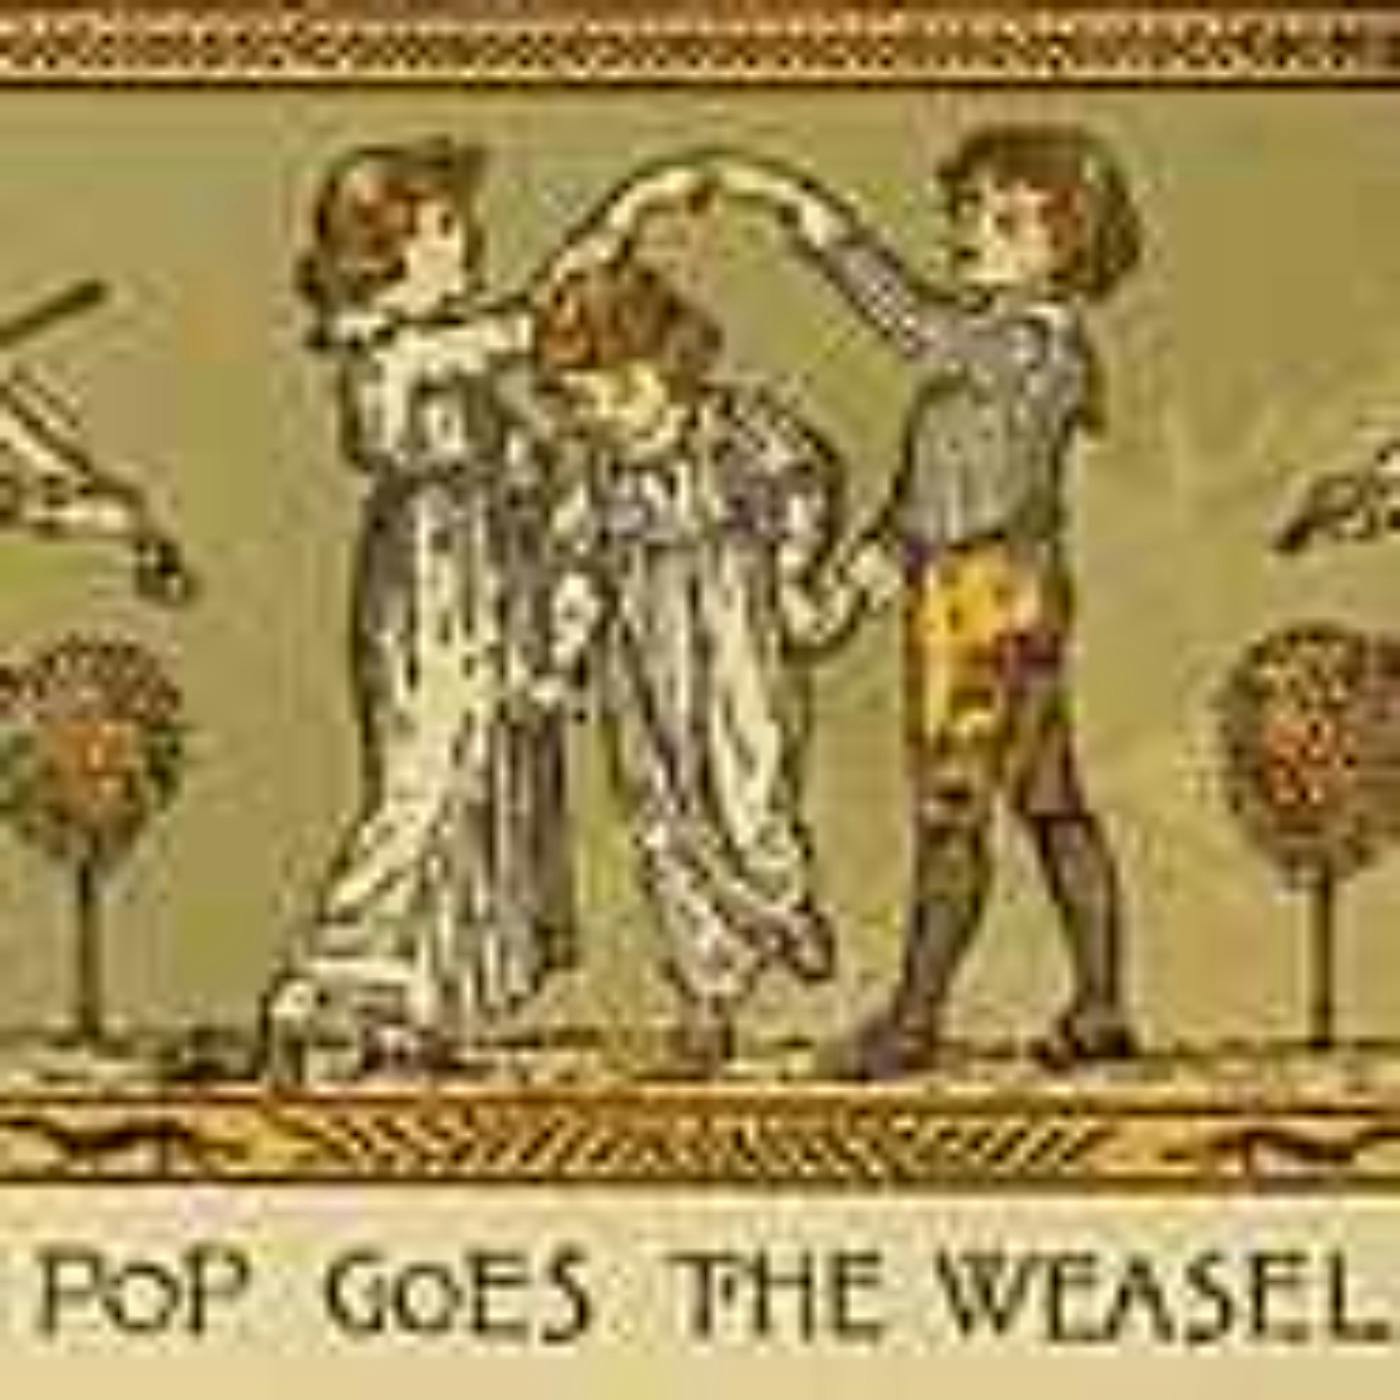 The ‘Pop Goes The Weasel’ Craze